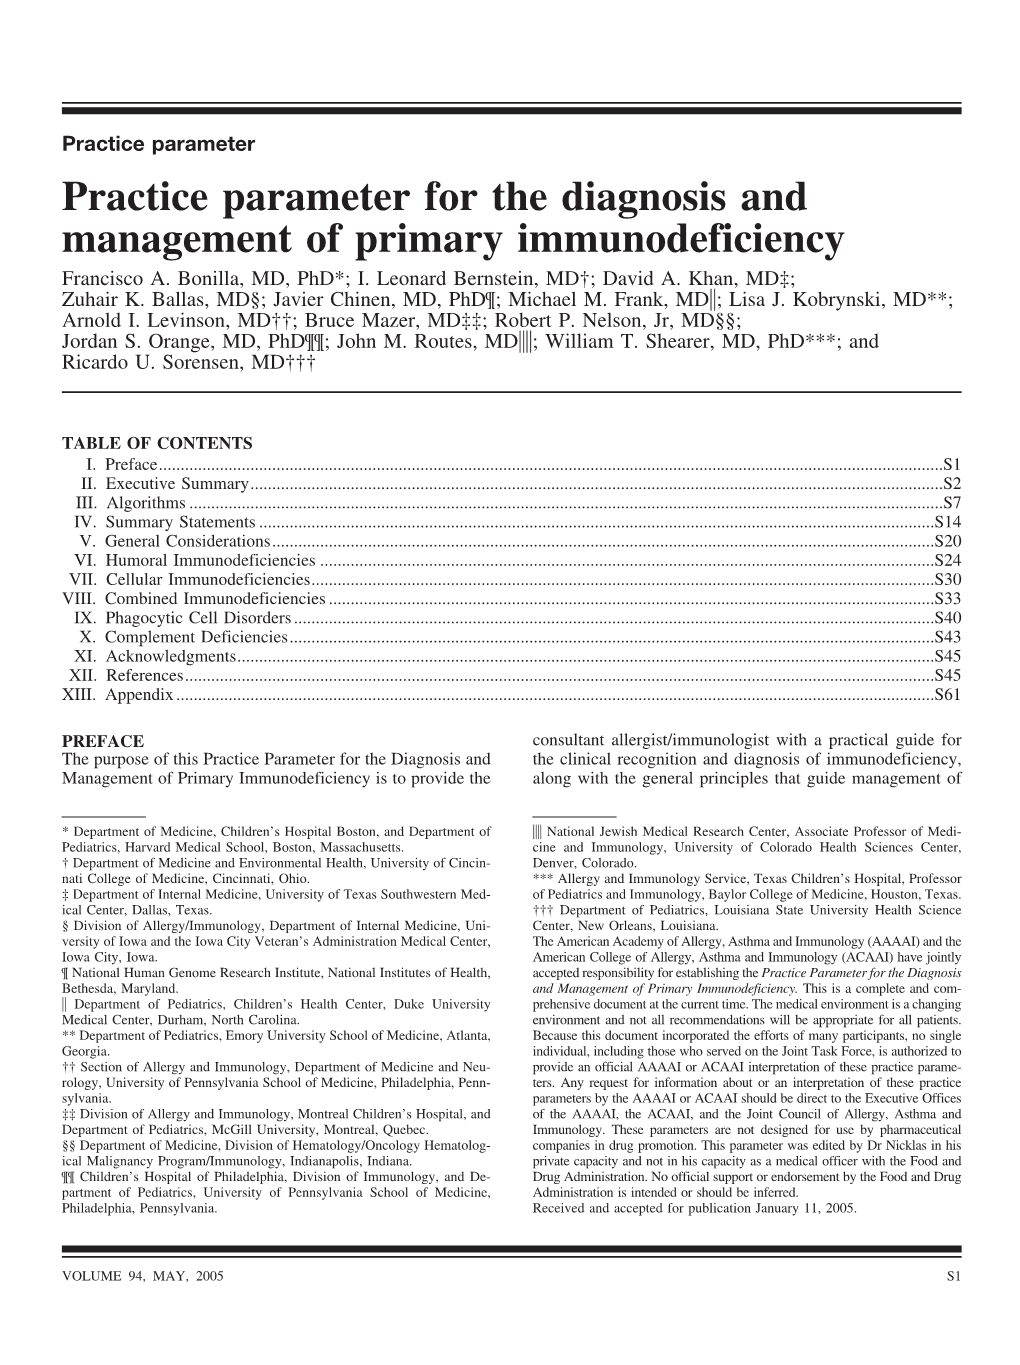 Practice Parameter for the Diagnosis and Management of Primary Immunodeficiency Francisco A